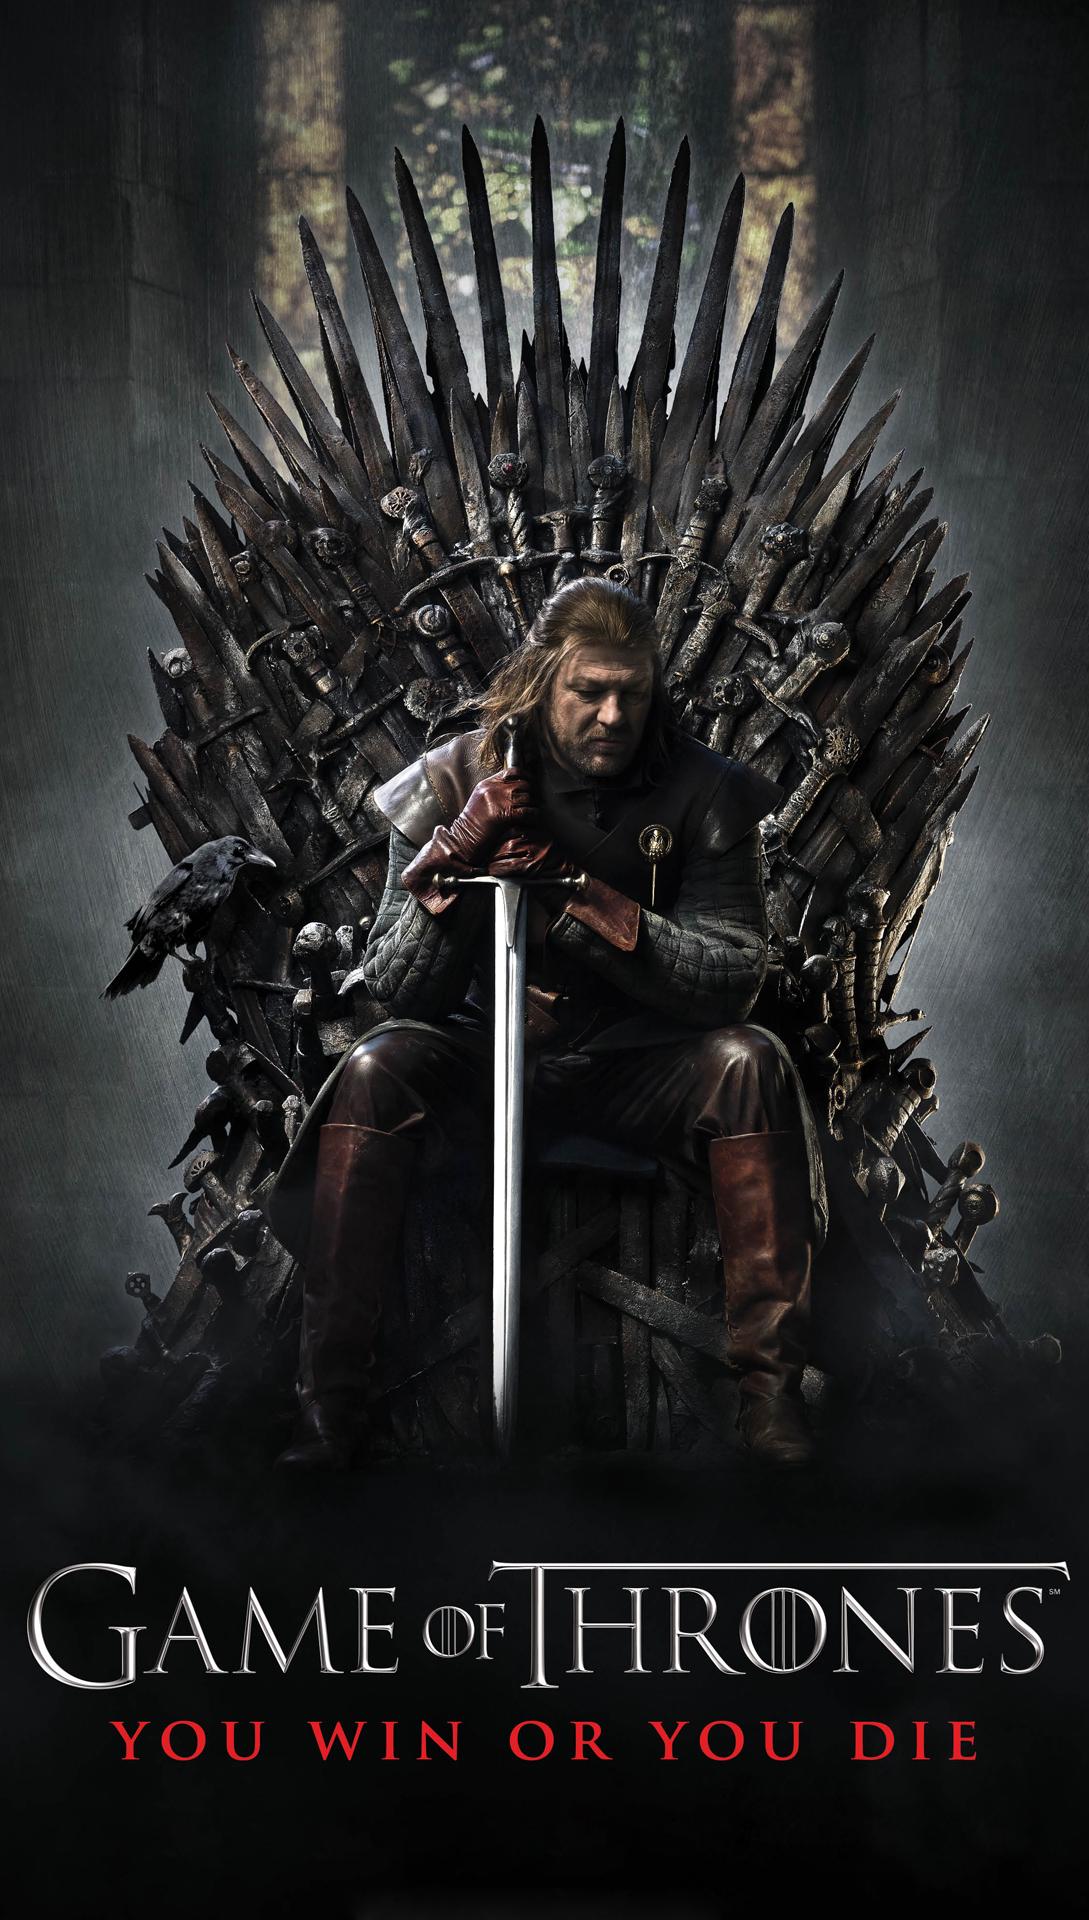 1089 x 1920 · jpeg - Game of thrones htc one wallpaper - Best htc one wallpapers